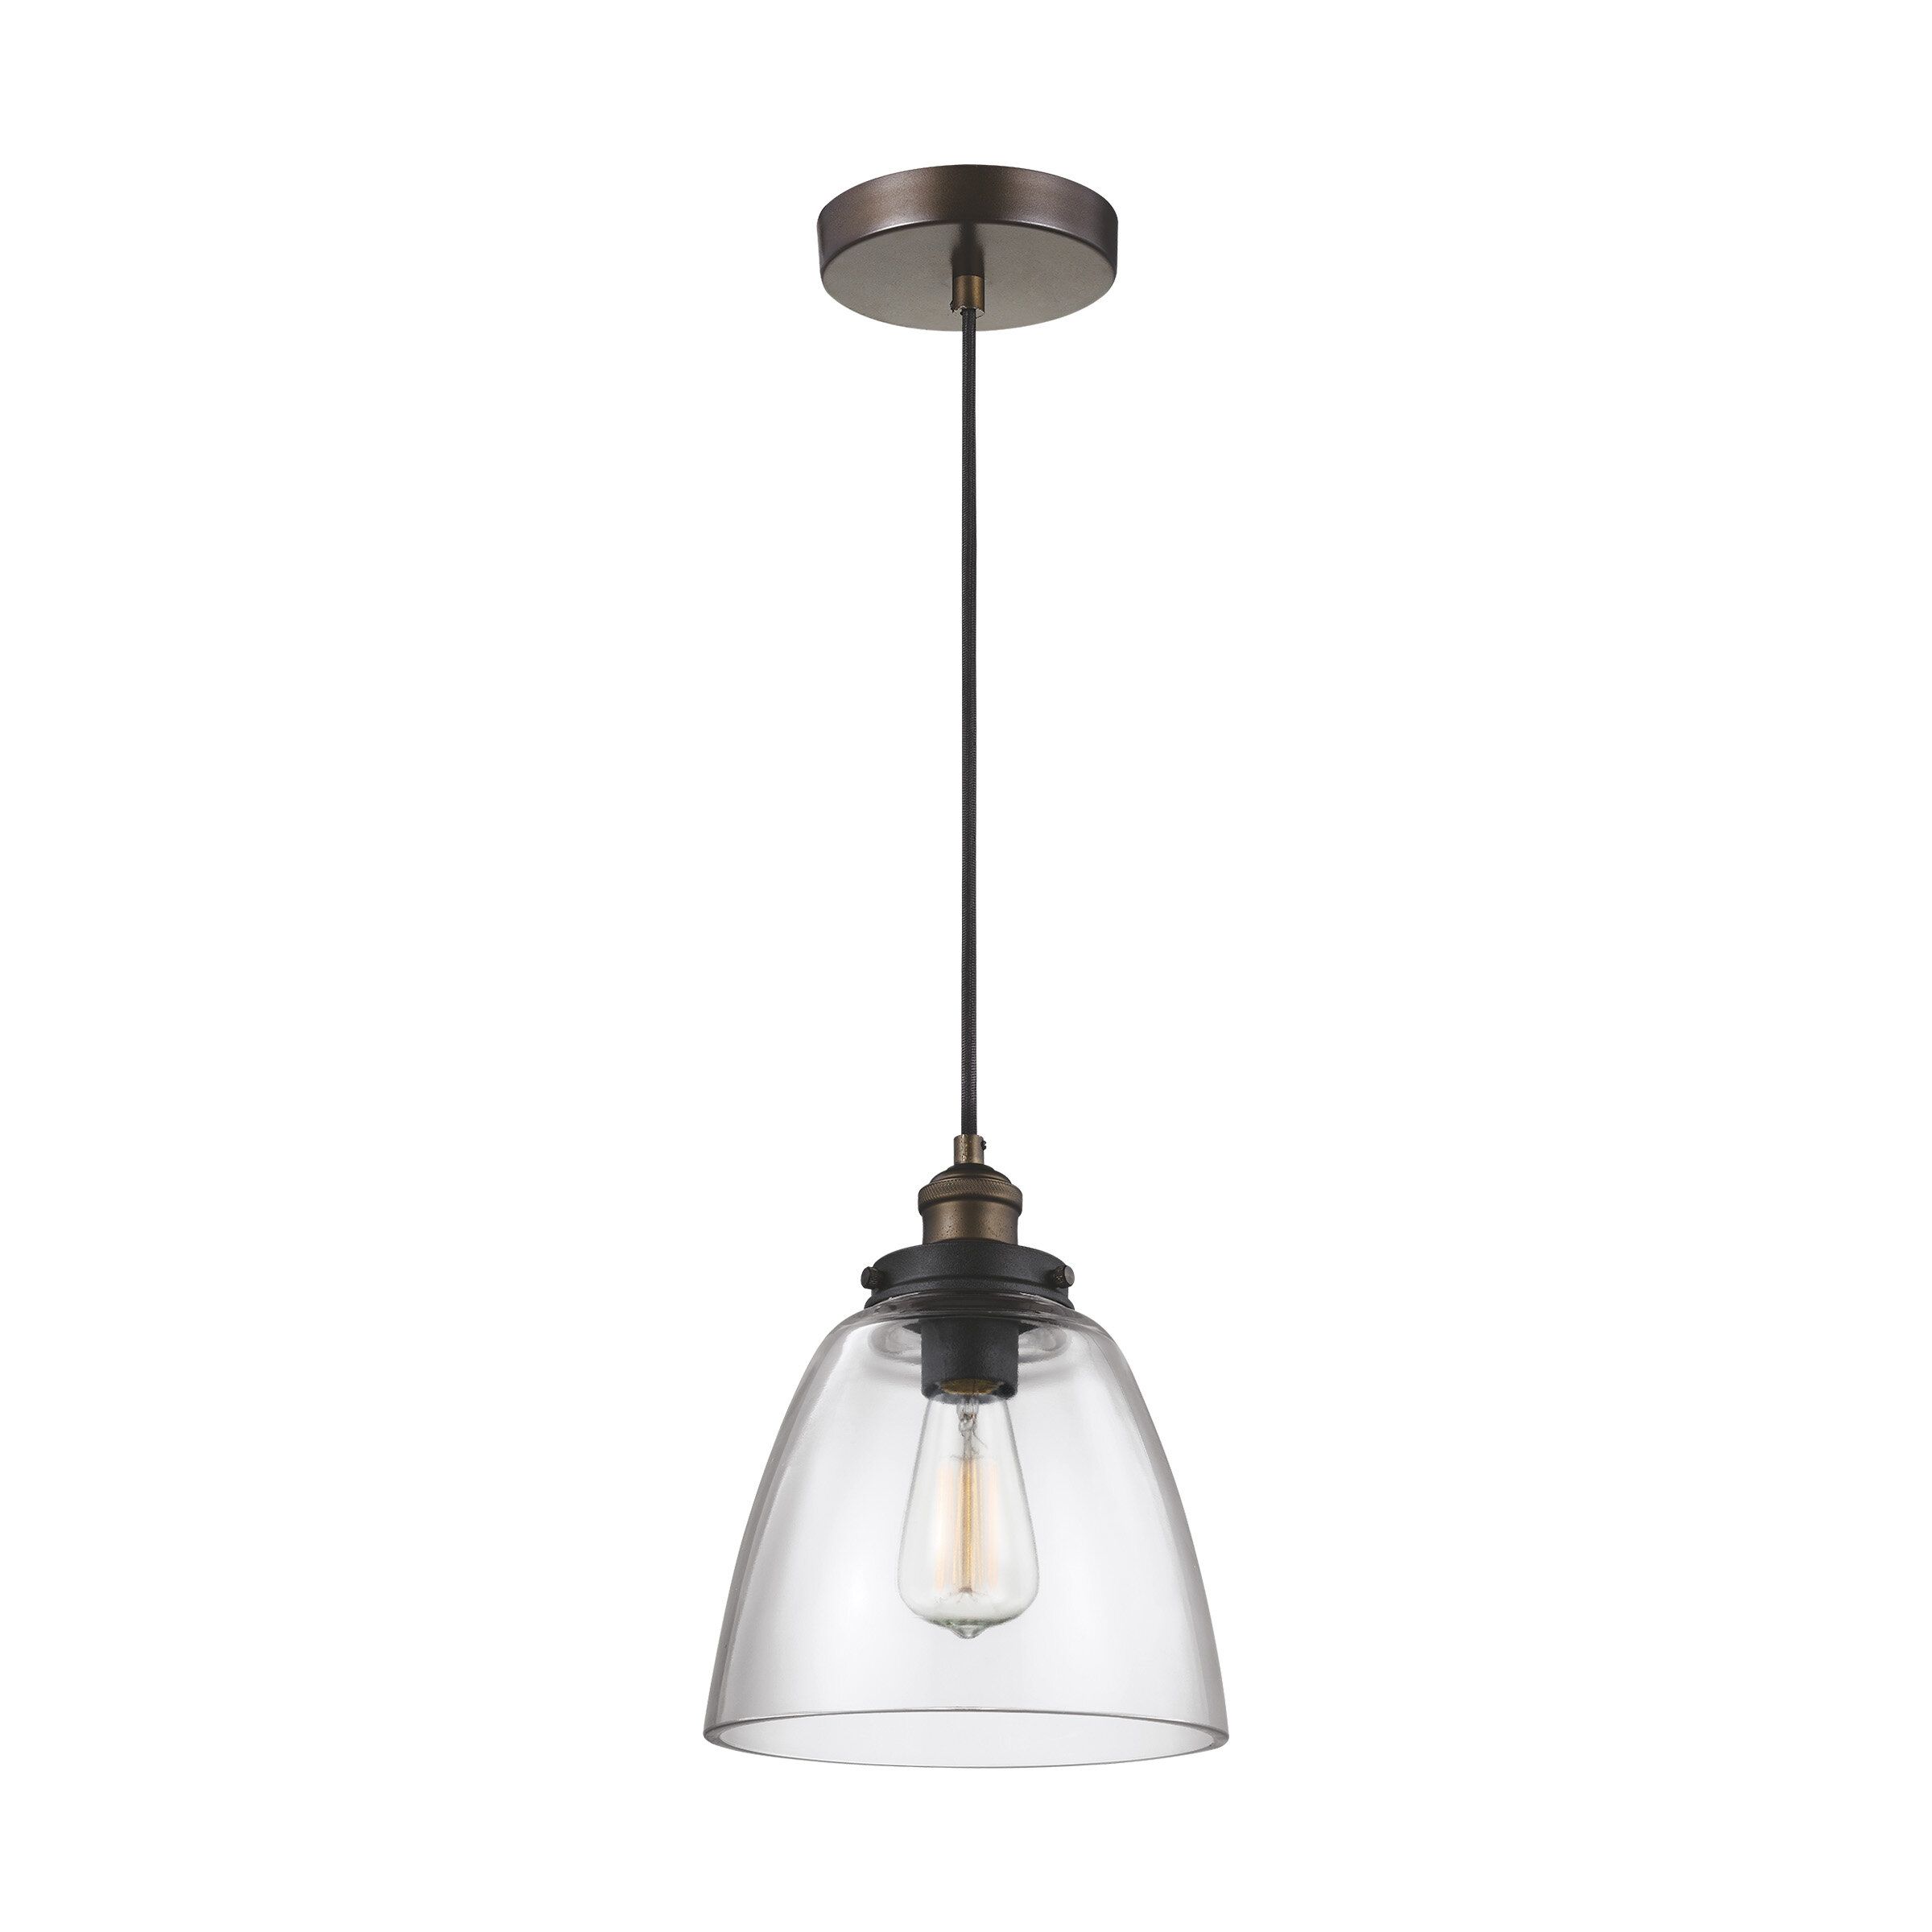 Bedford 1 Light Single Cone Pendant Pertaining To Goldie 1 Light Single Bell Pendants (View 15 of 30)